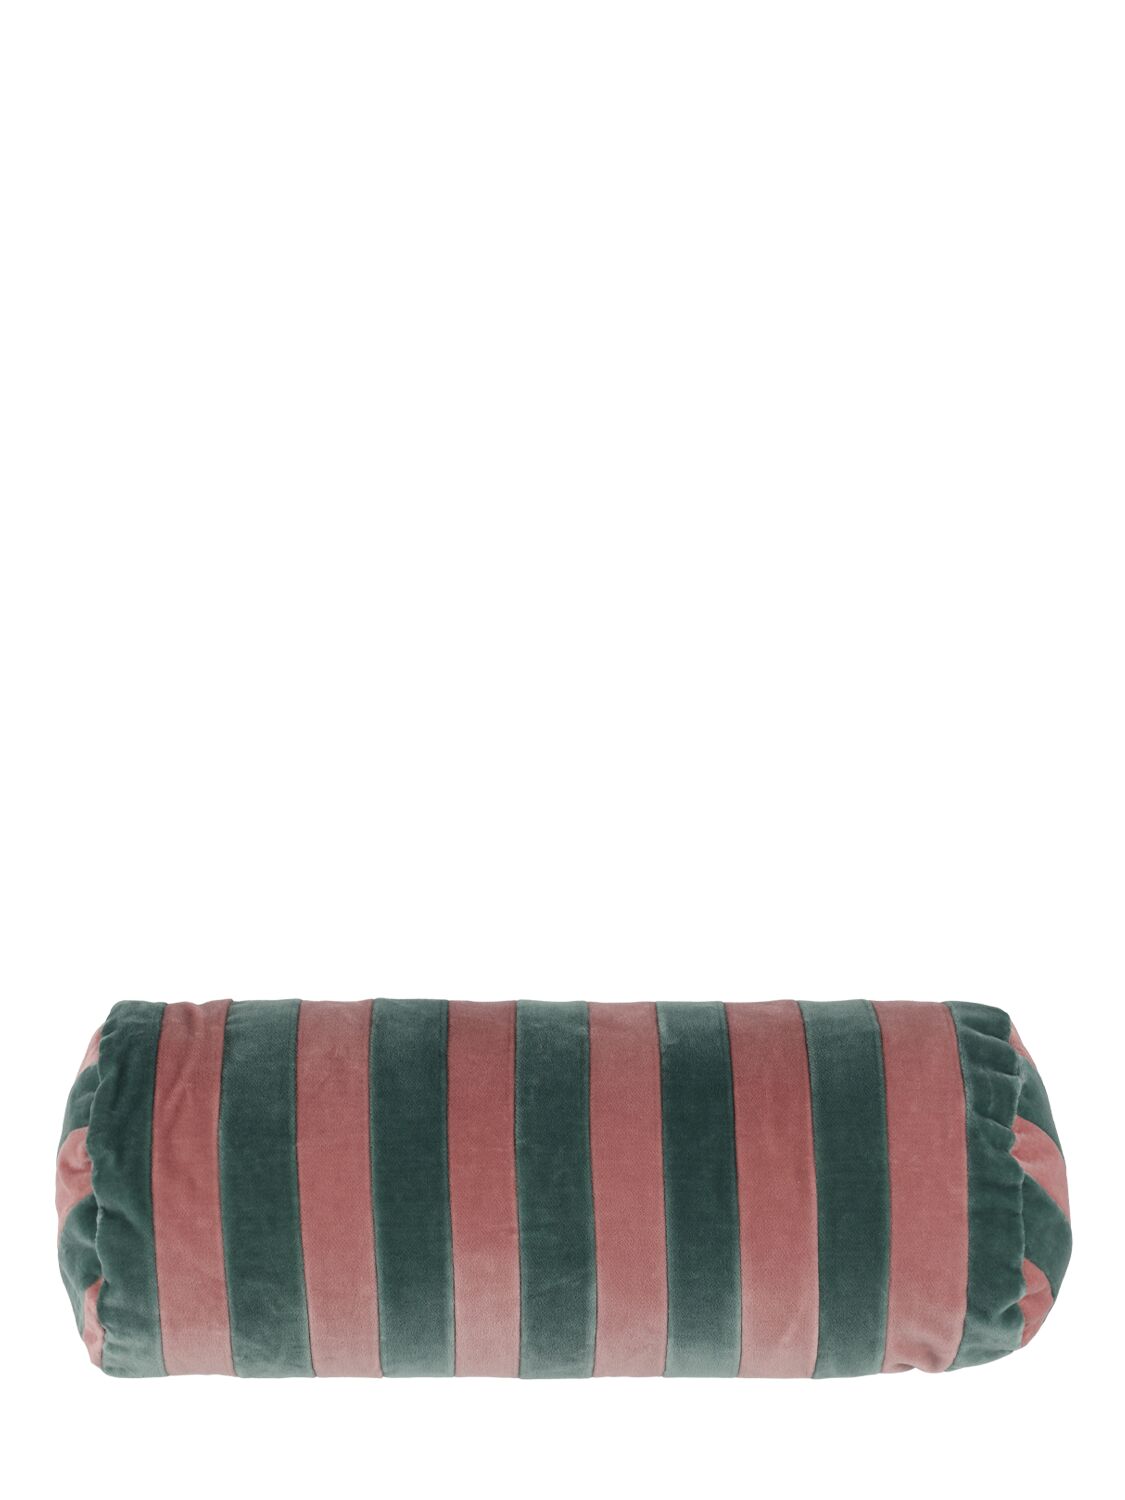 Christina Lundsteen Striped Bolster Cushion In Multi